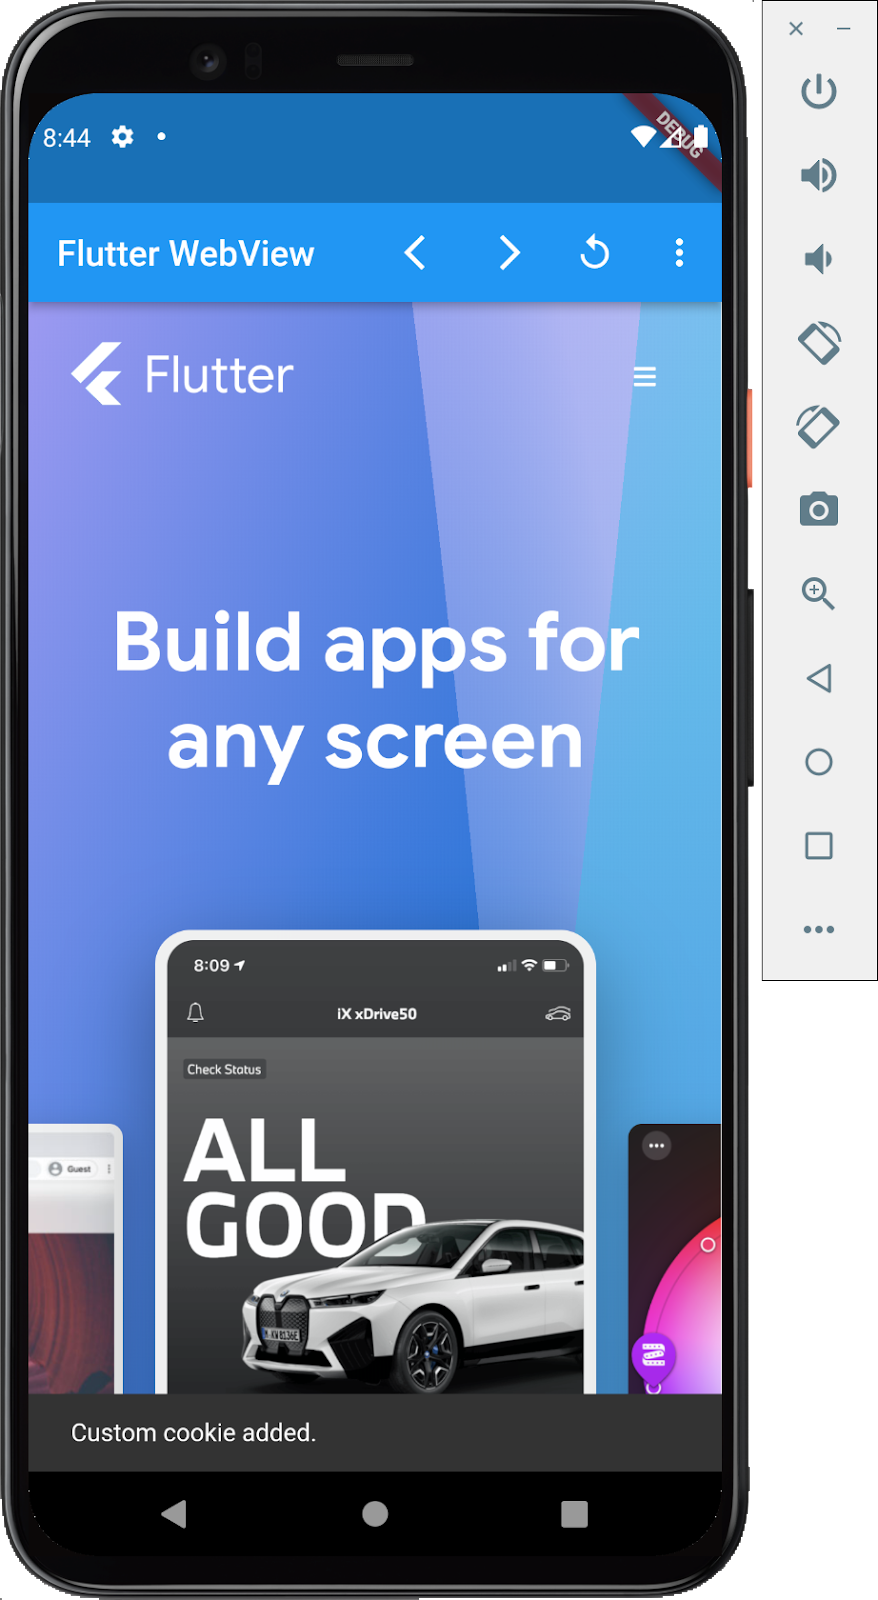 A screen shot of an Android emulator running a Flutter app with an embedded webview showing the Flutter.dev homepage with a toast popup that reads 'Custom cookie added.'